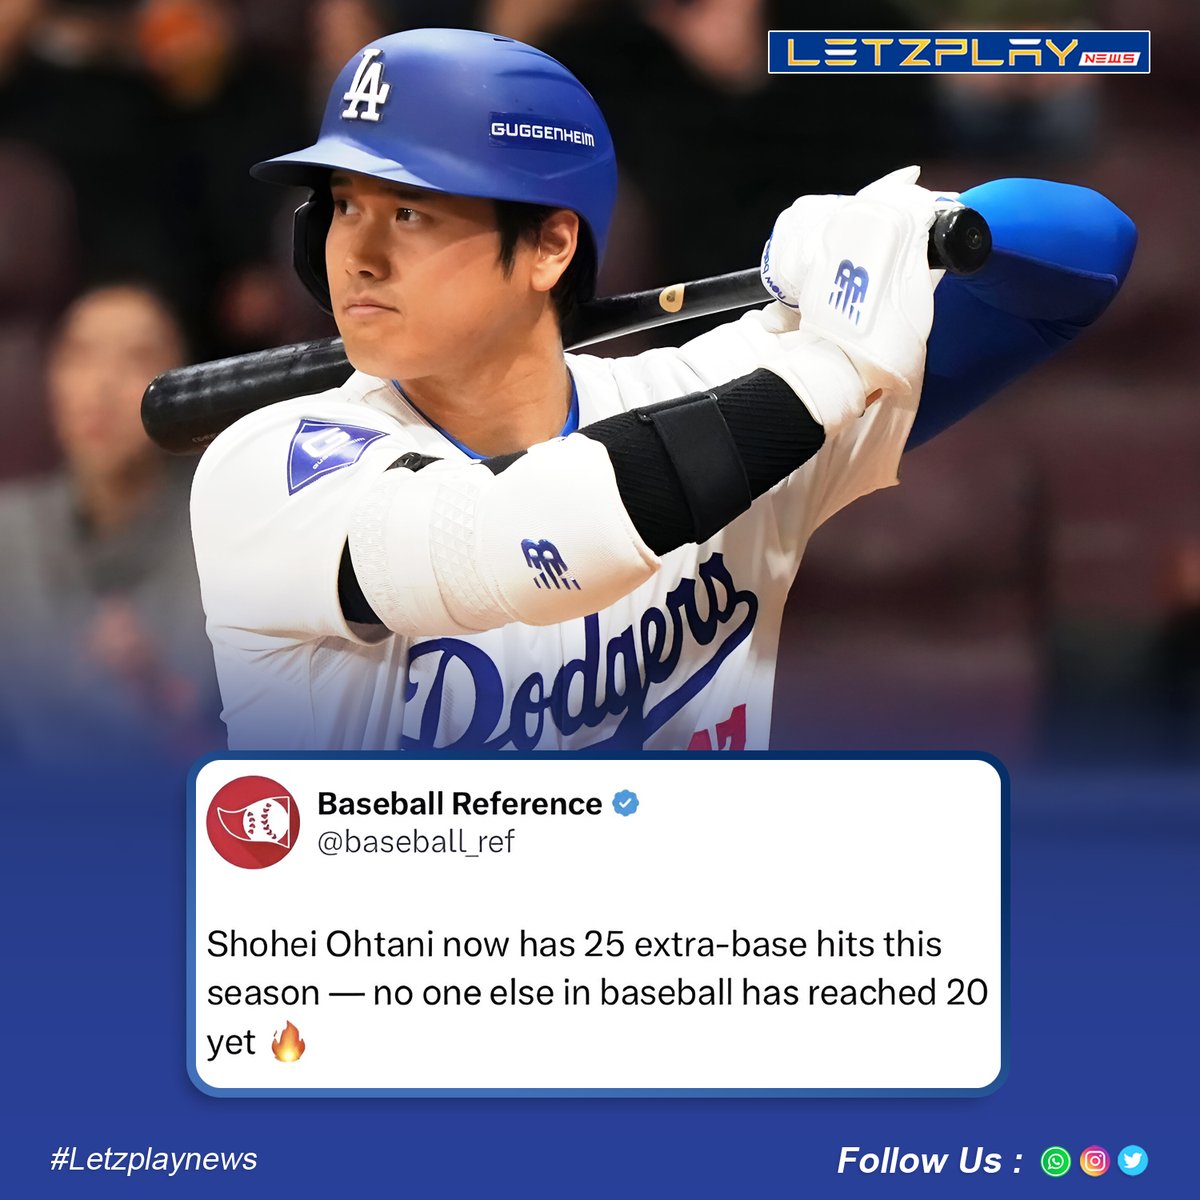 Witness Shohei Ohtani's stunning performance as he showcases mid-season form with his exceptional skills on the field! ⚾🔥 

Don't miss out on the action-packed moments!
.
.
.
.
#ShoheiOhtani #AngelsBaseball #MLB #LosAngelesAngels #Baseball #Sports #Athlete #StellarPerformance